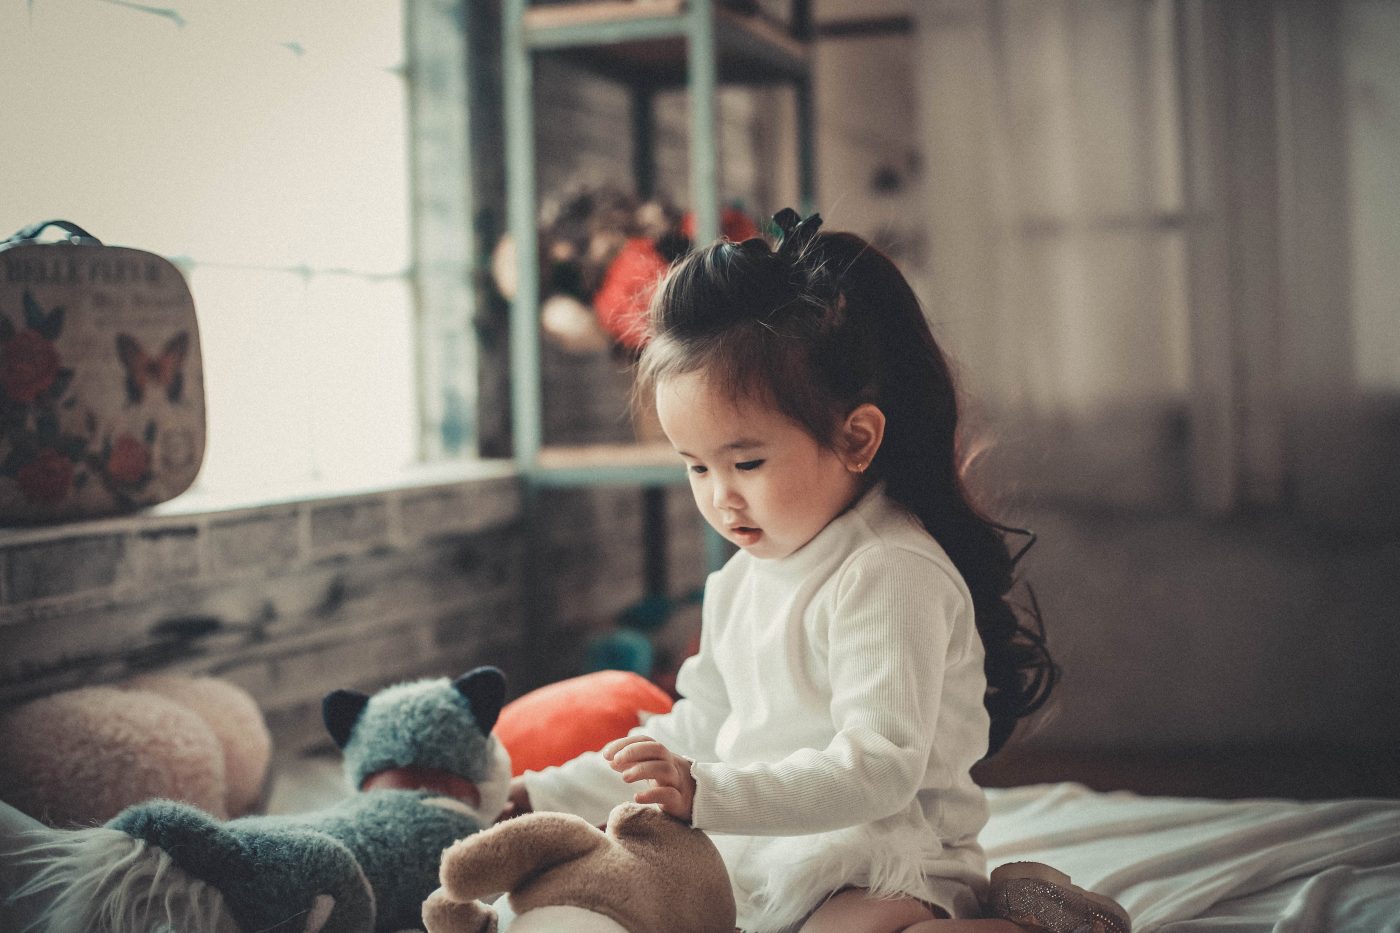 How can parents choose toys that not only are fun, but also help a child learn? The American Academy of Pediatrics published a report title "Selecting Appropriate Toys for Young Children in the Digital Era."